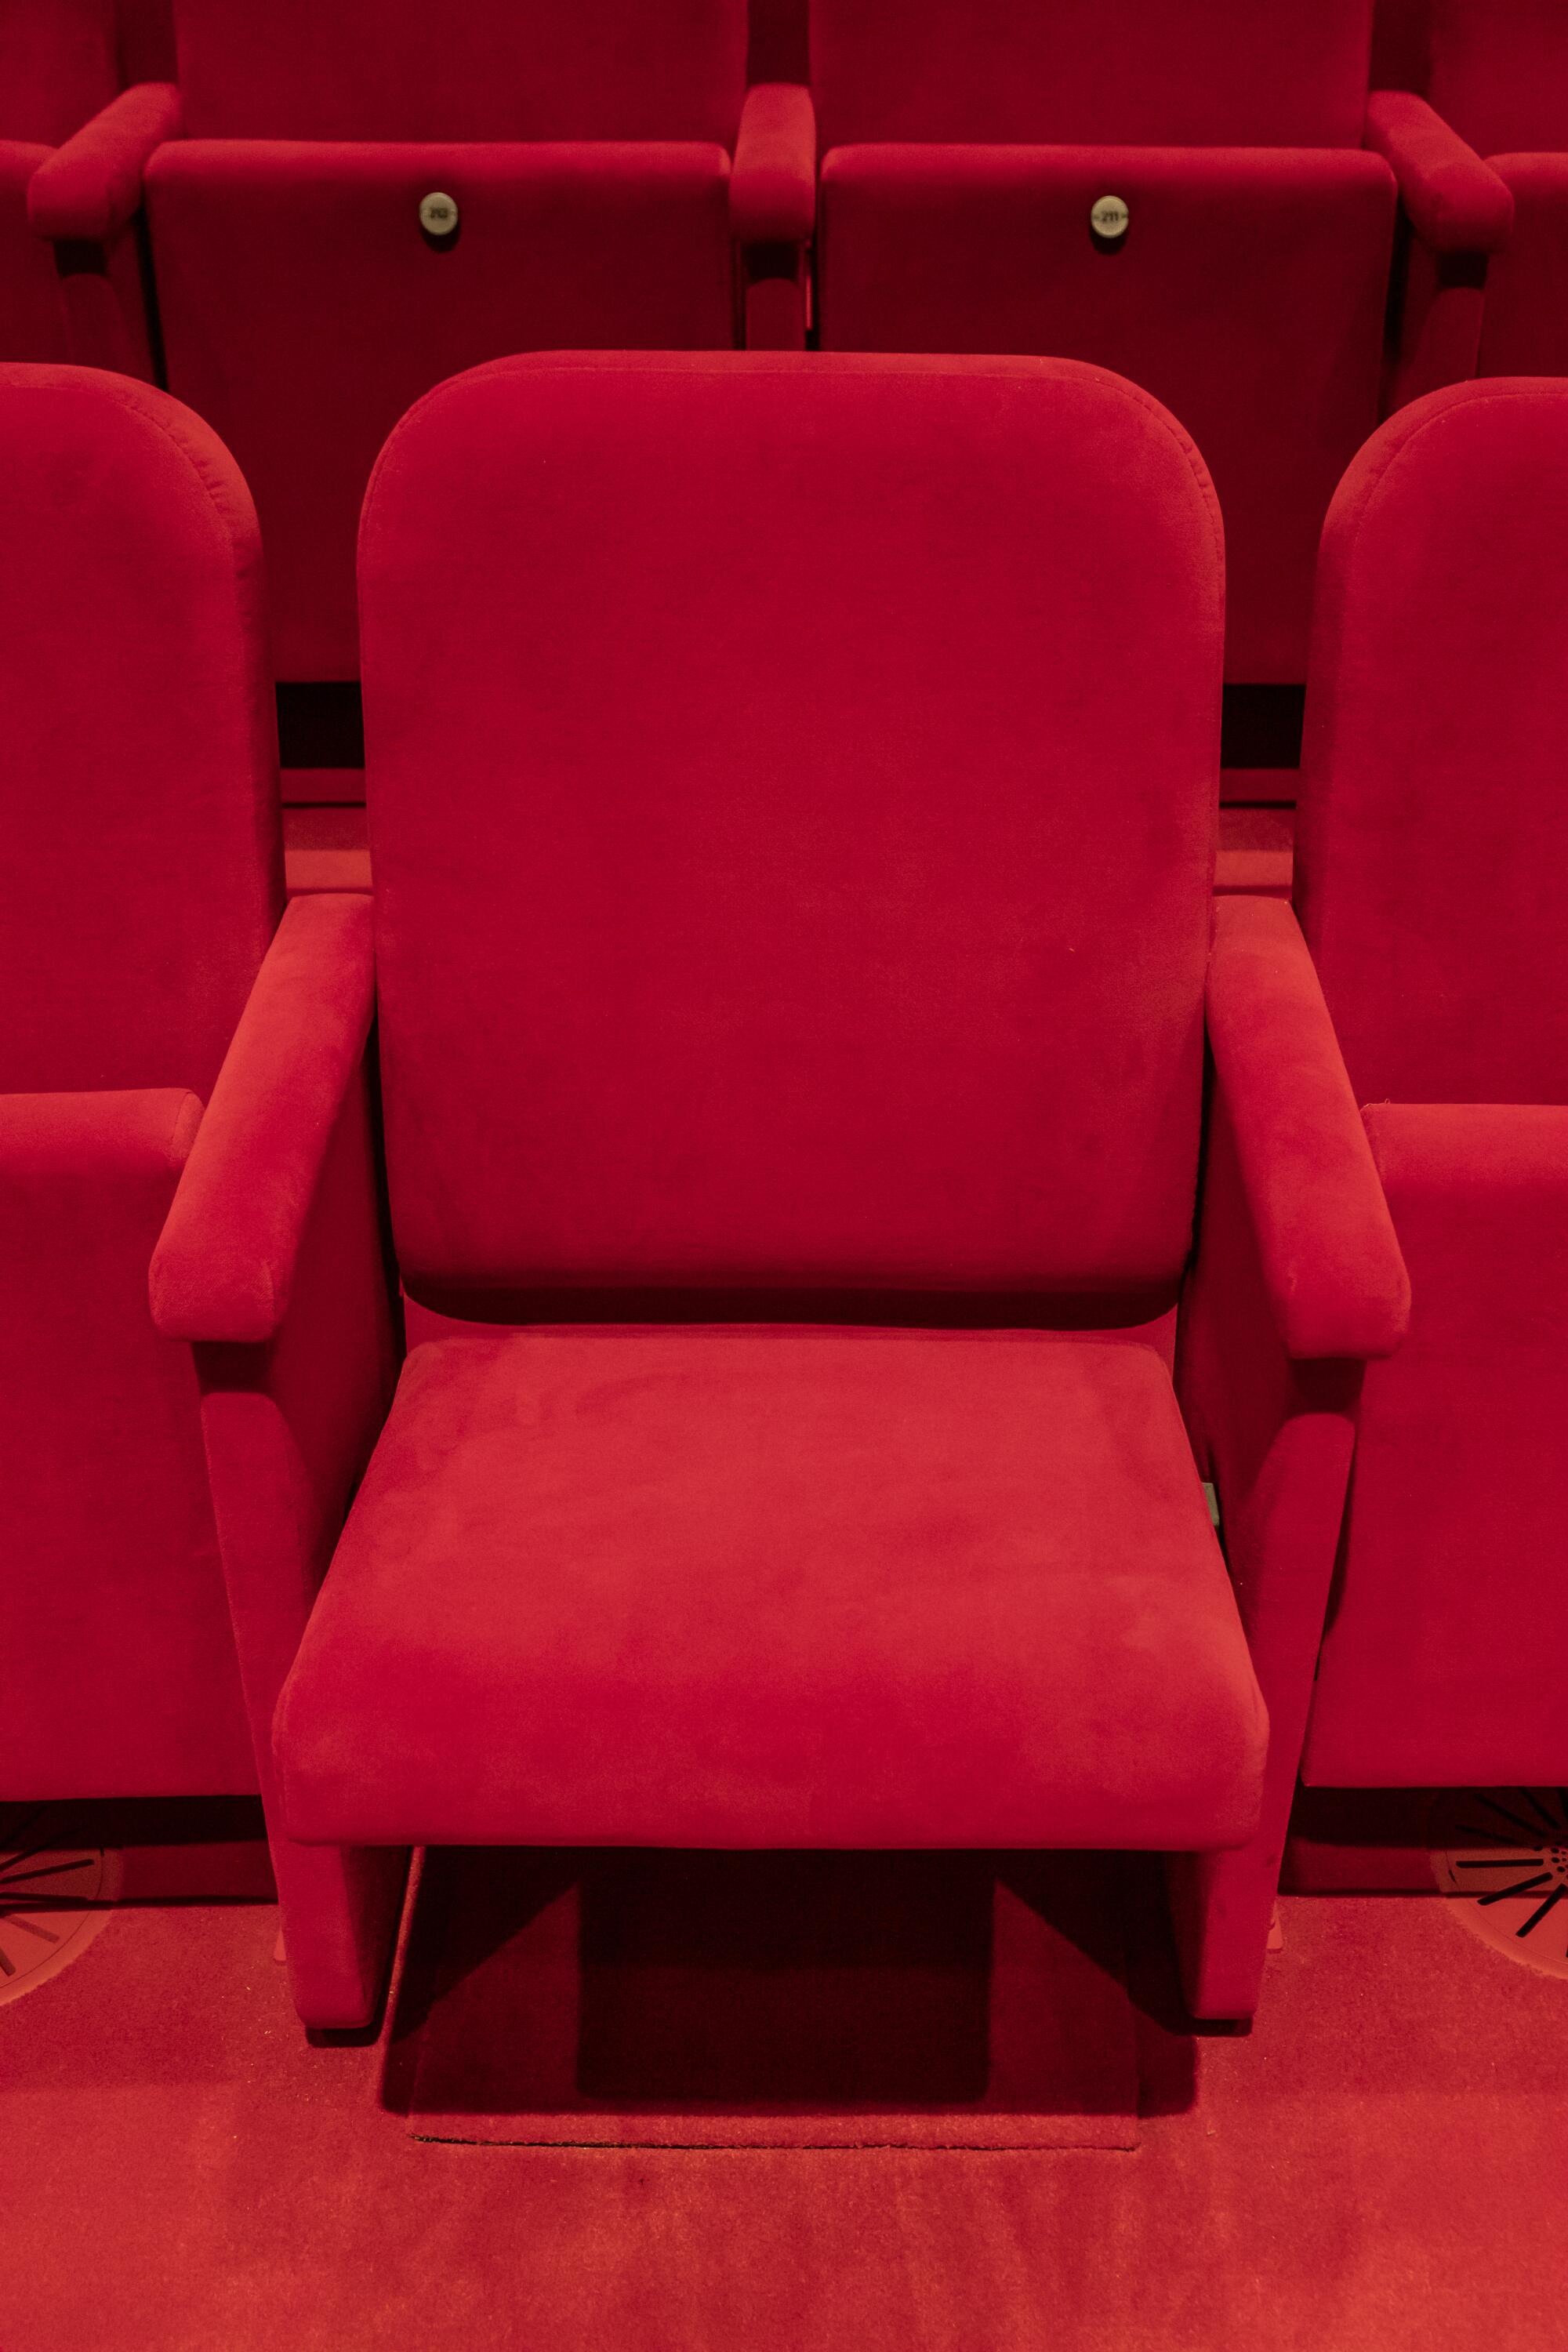  Detail of a red seat in the David Geffen Theater.